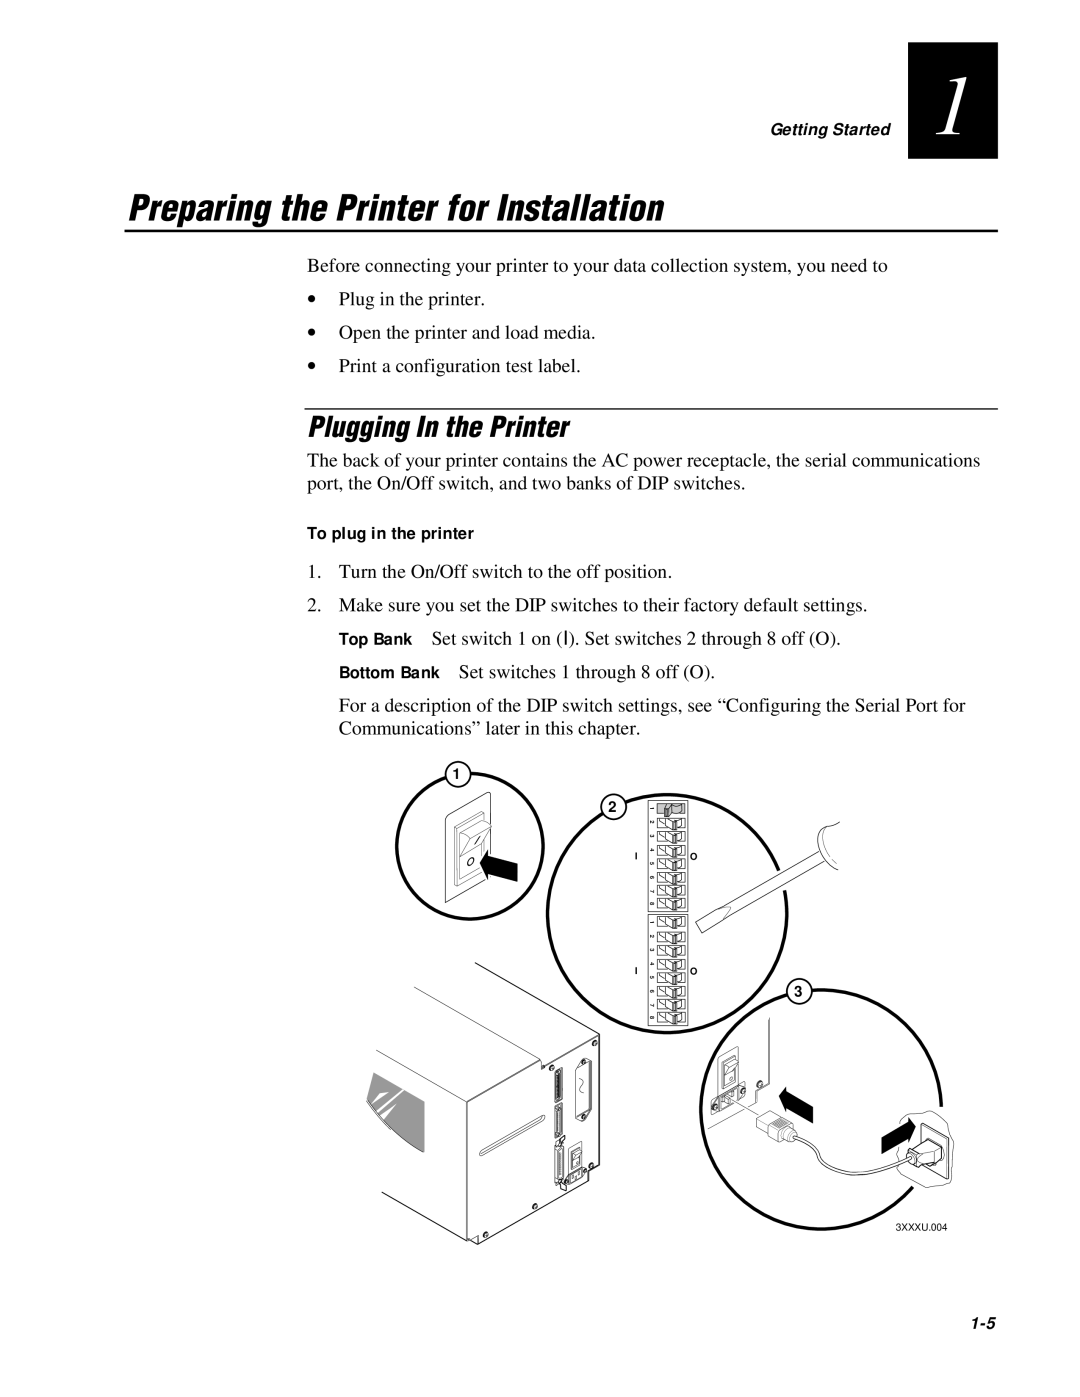 IBM EasyCoder 3400e user manual Preparing the Printer for Installation, Plugging In the Printer, To plug in the printer 